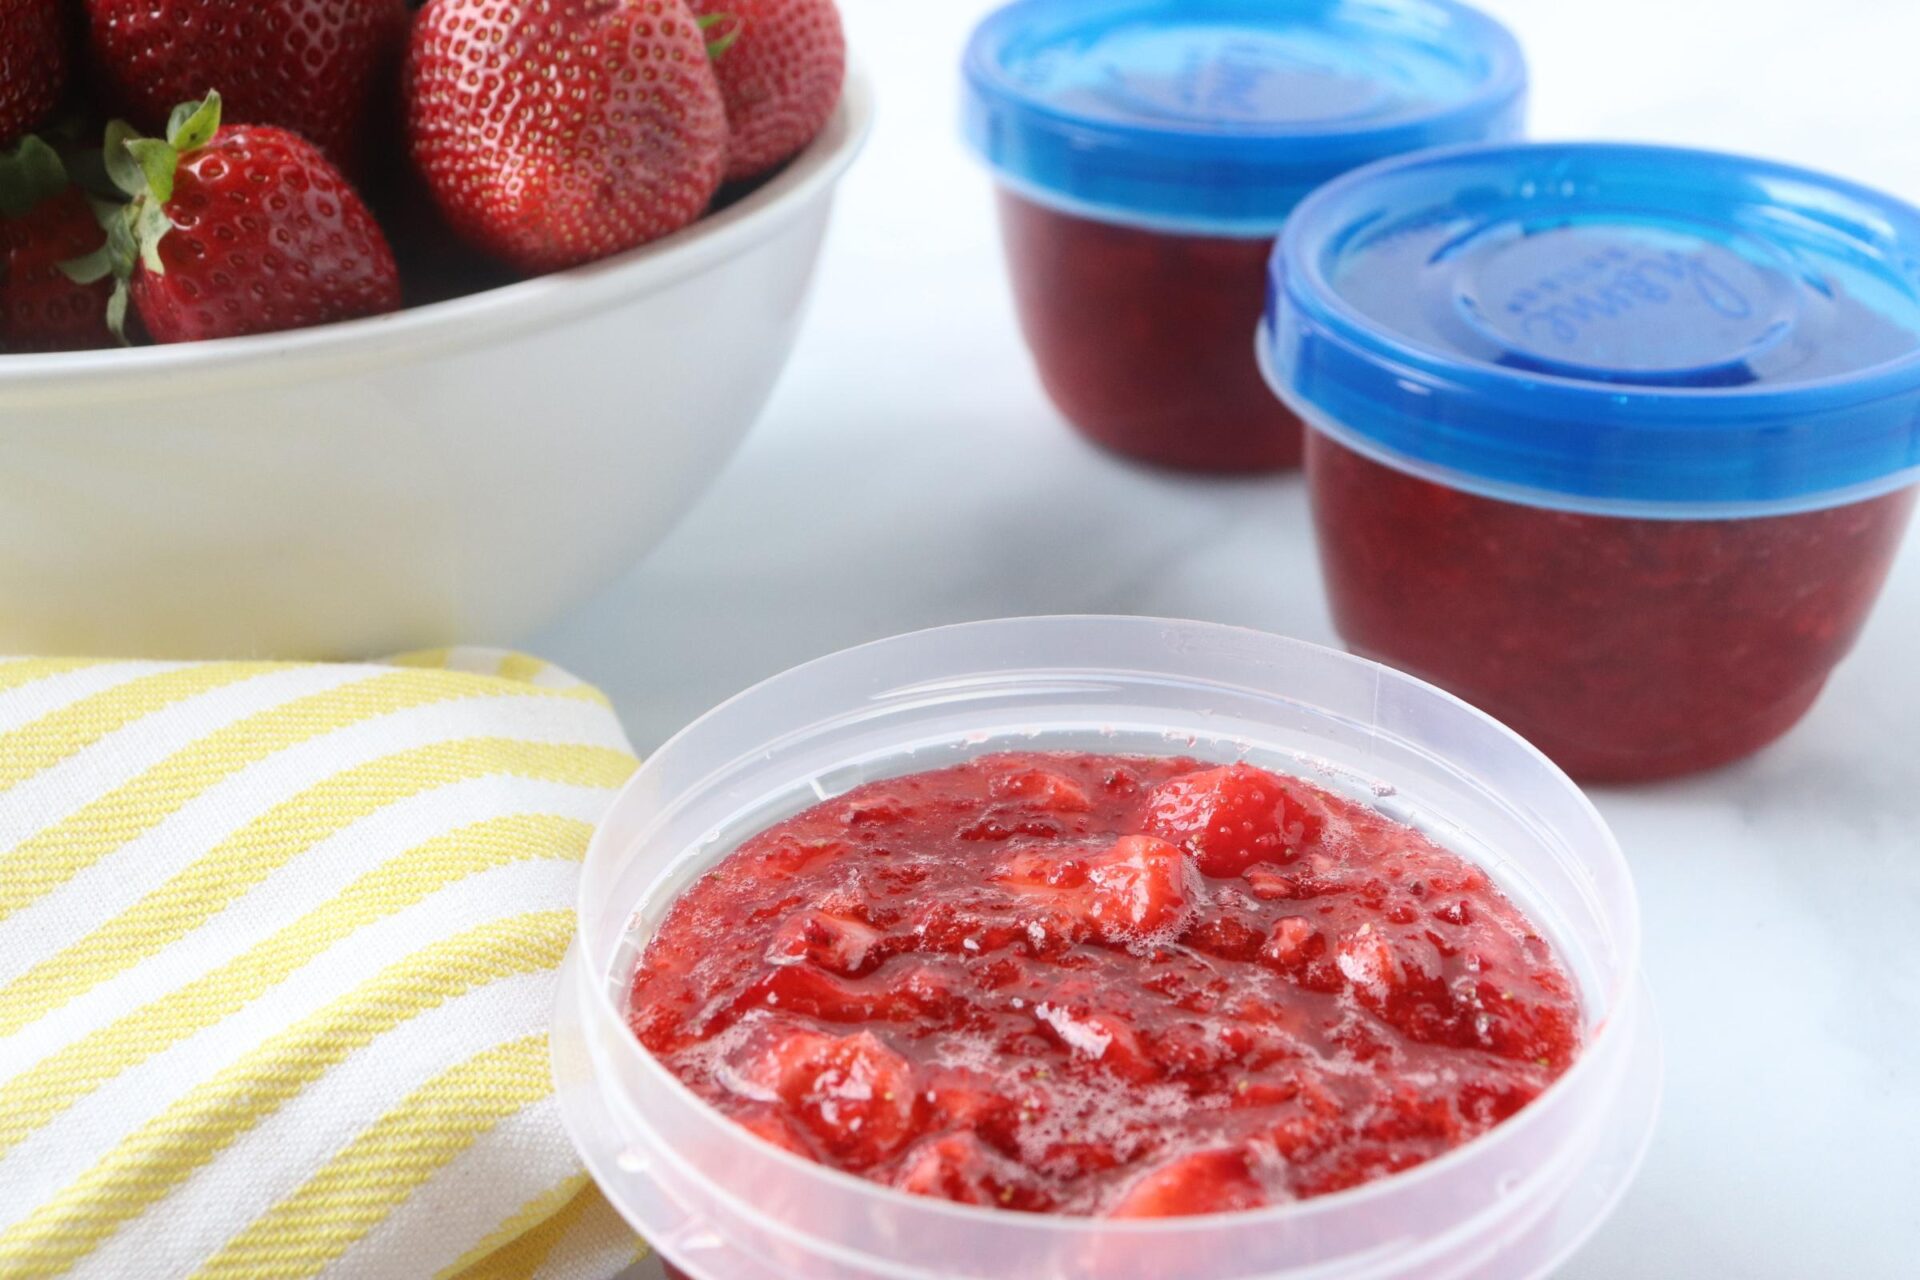 Making strawberry freezer jam is so easy to make with just a few simple steps you can have homemade strawberry jam all year long!